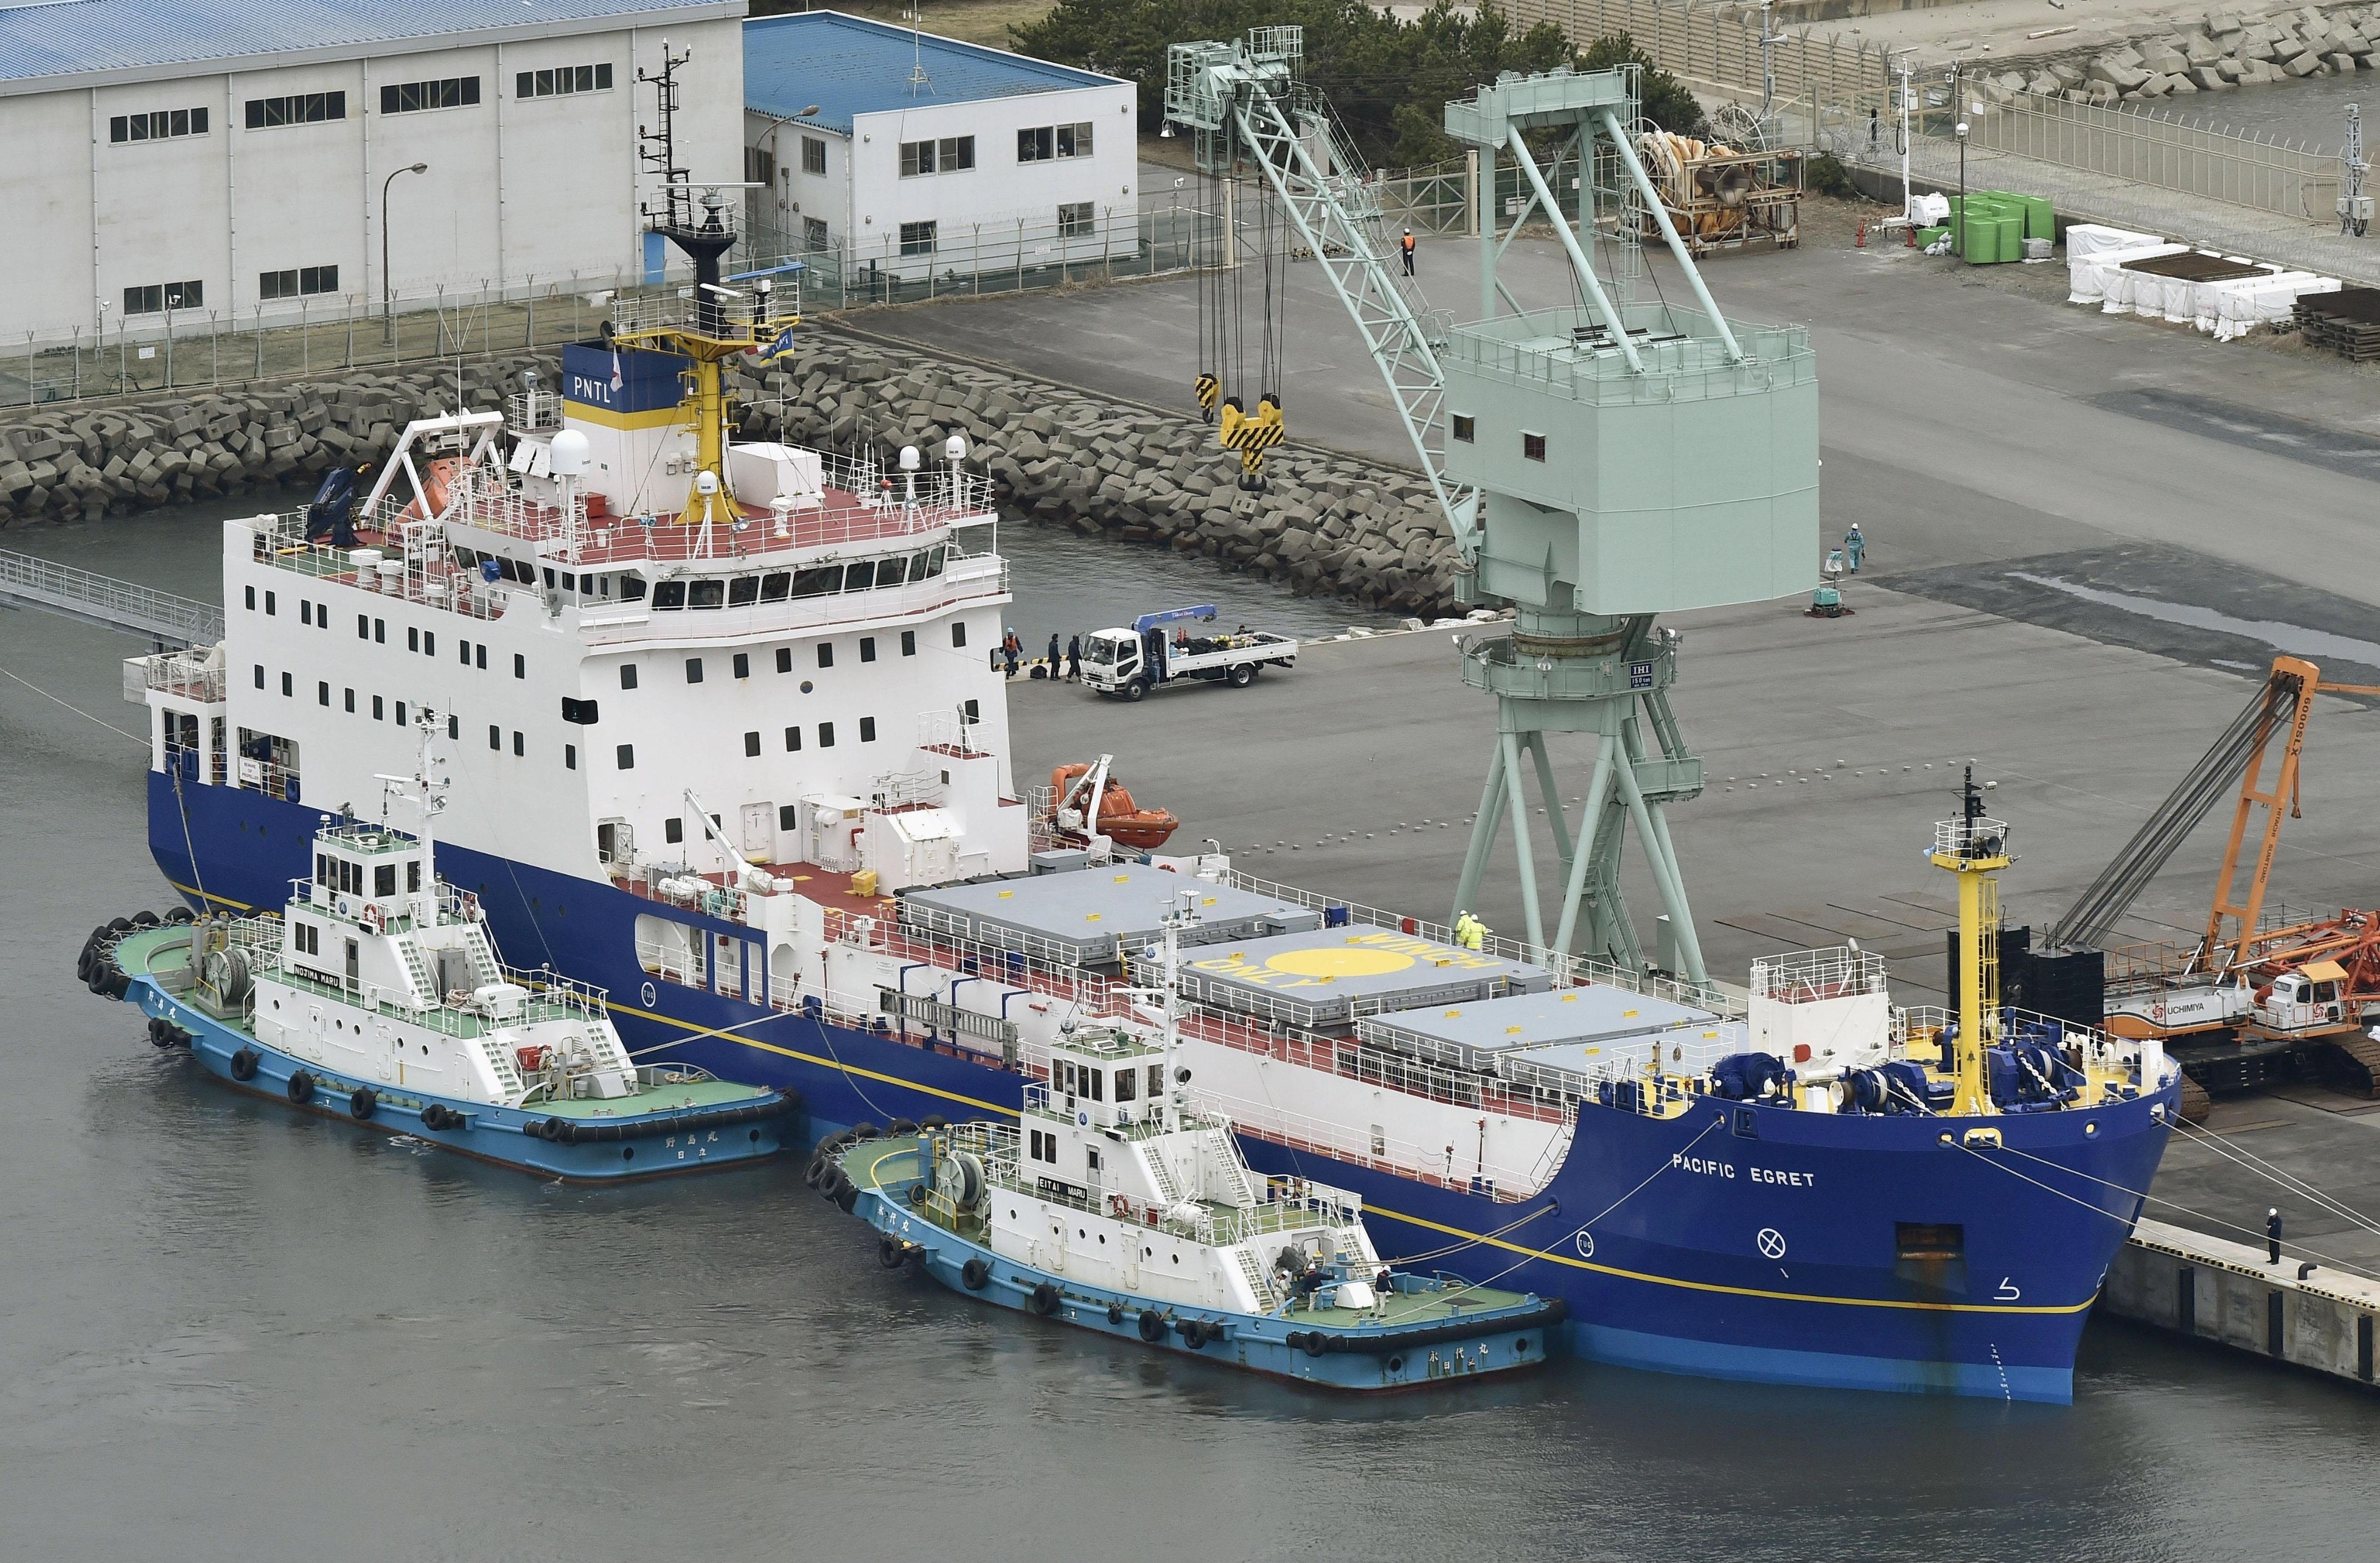 The Pacific Egret docked in Tokai (Ibaraki Prefecture) in March 2016, waiting to depart to the US with a cargo of Japanese plutonium. Tokyo's large stockpiles are one of the reasons why the country is considered to be a 'latent nuclear power. (Kyodo)